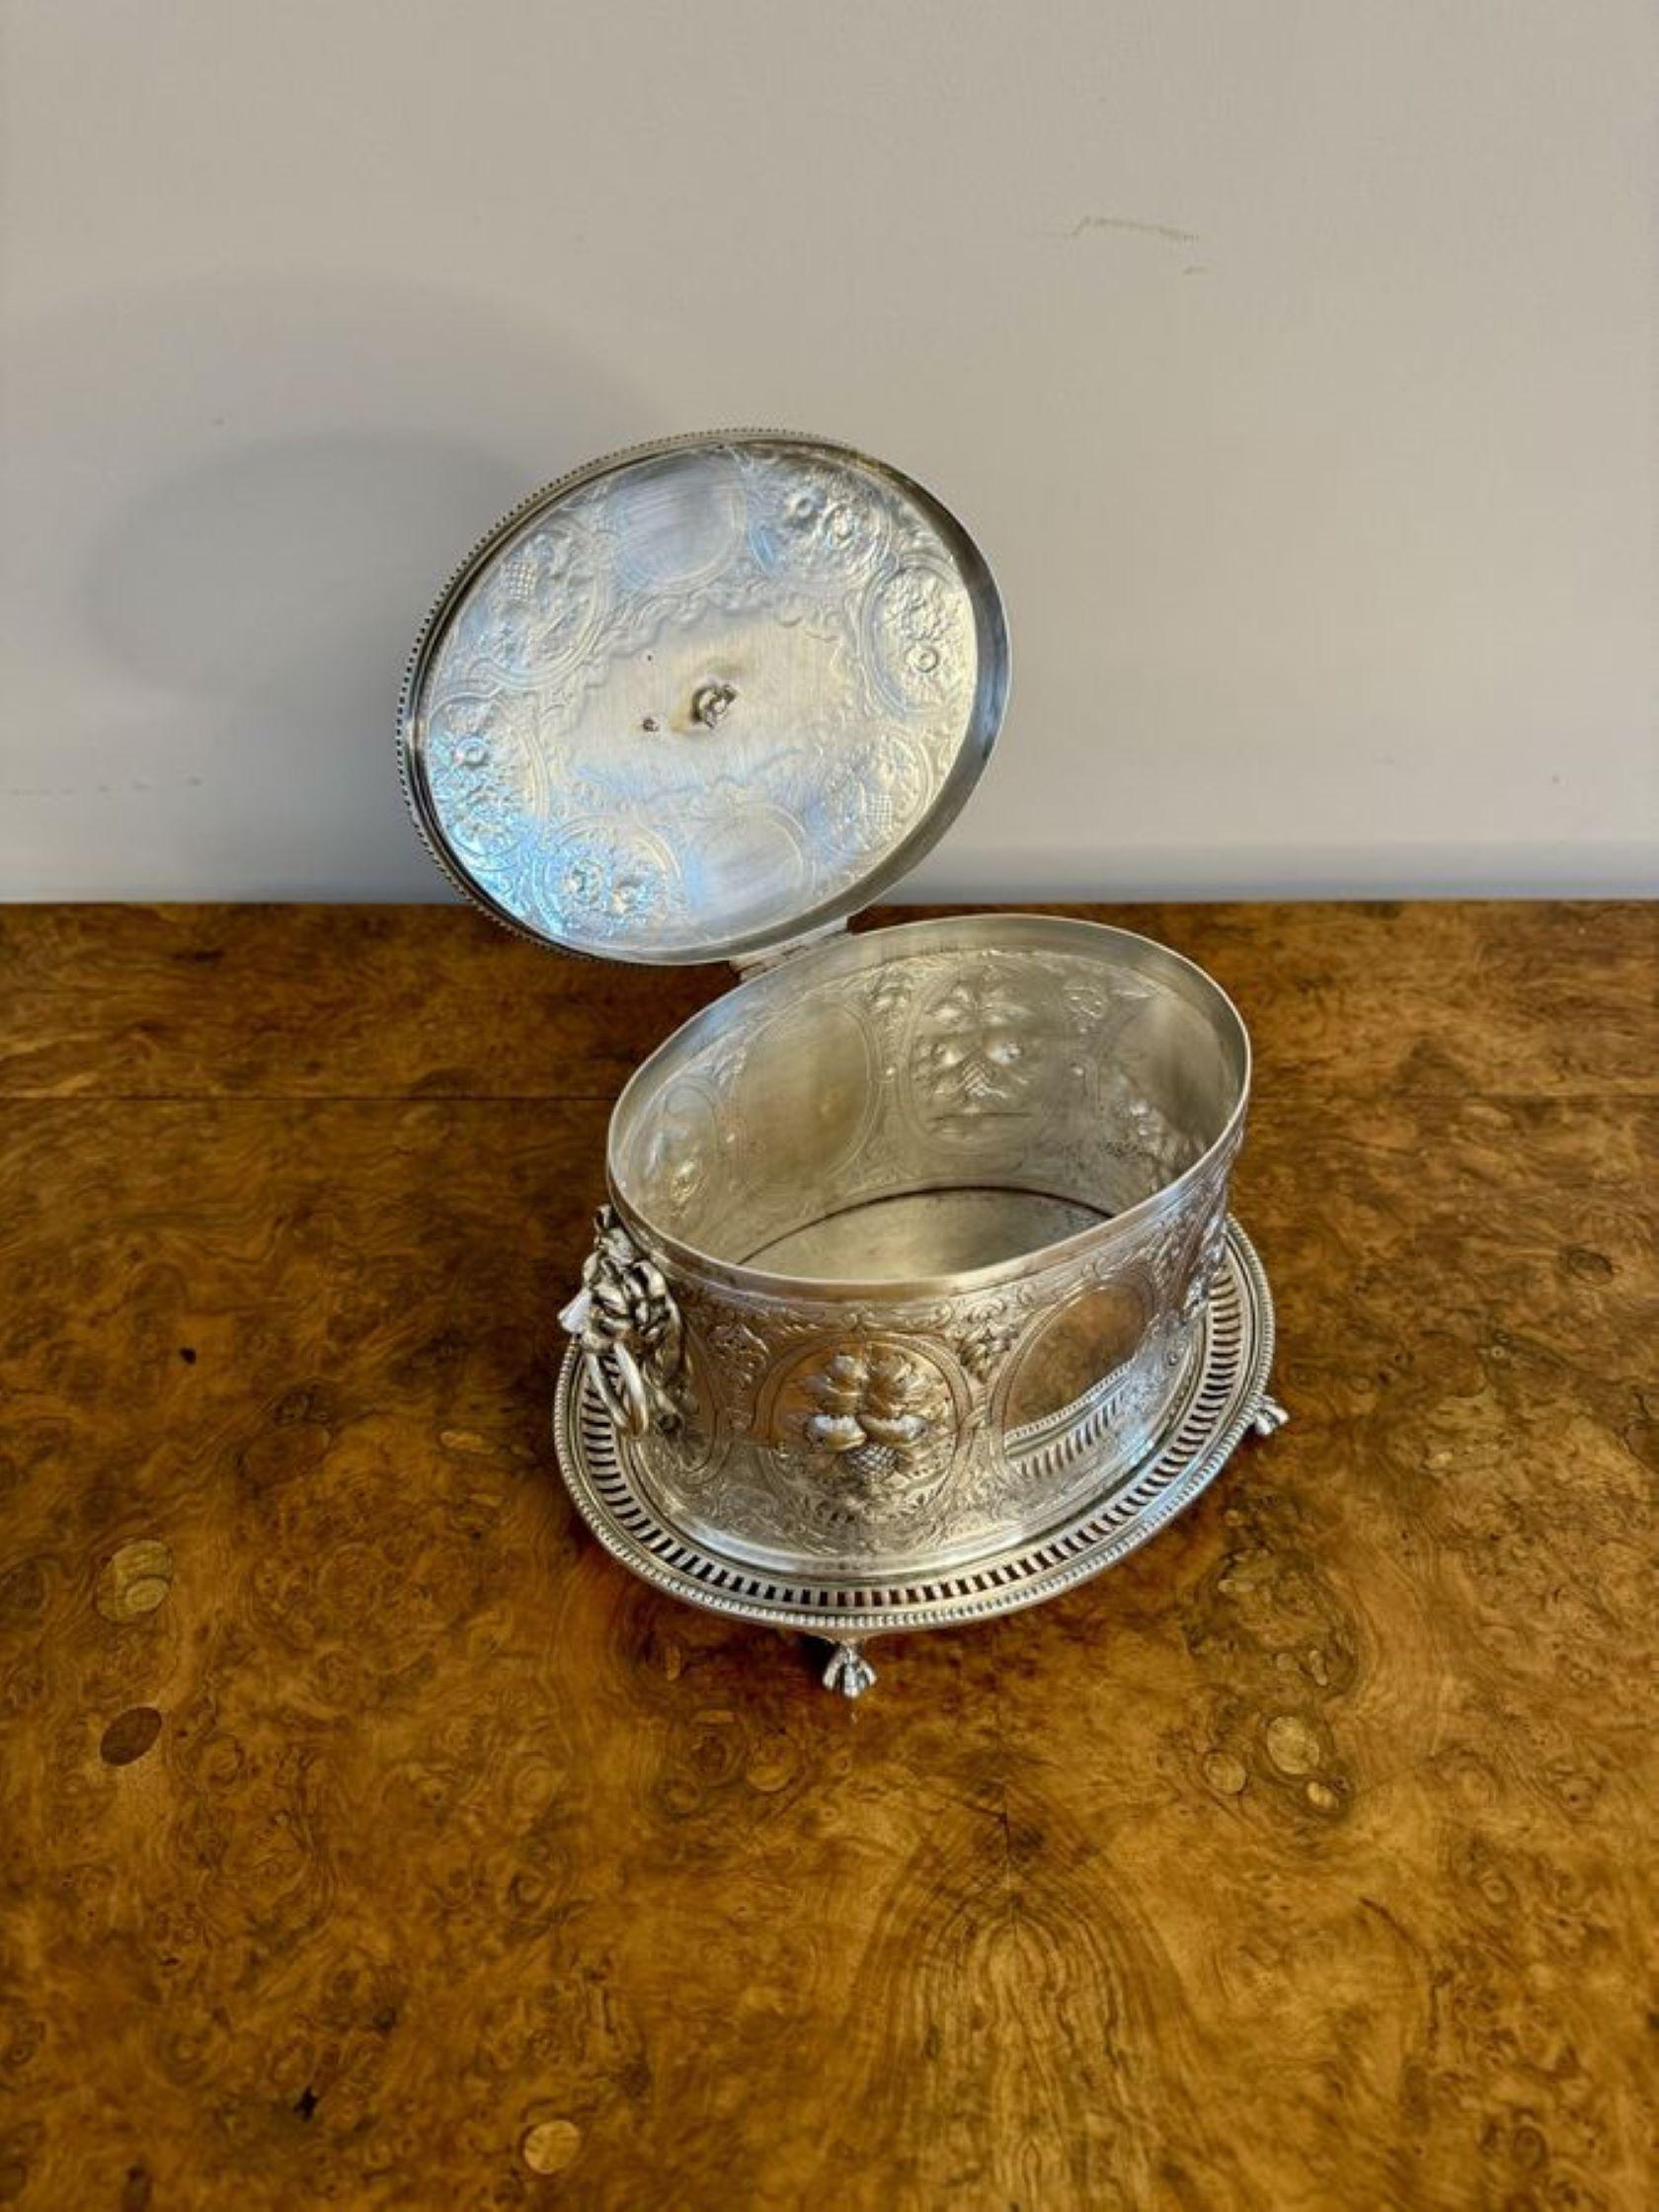 Outstanding quality antique Edwardian ornate silver plated biscuit barrel  For Sale 2